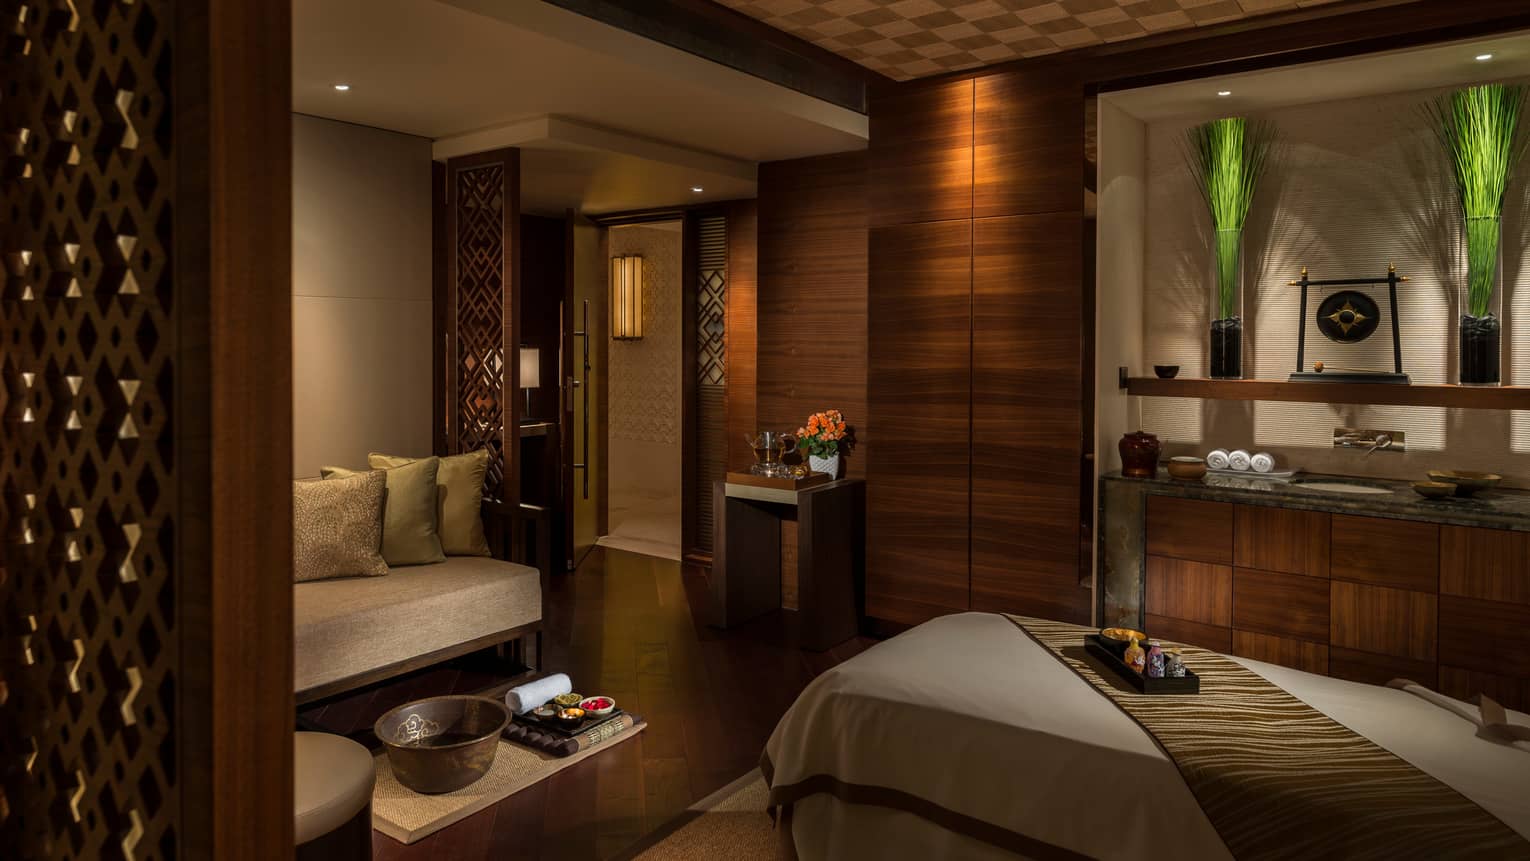 Spa treatment room with carved wood detail walls, bed and table with trays with oils